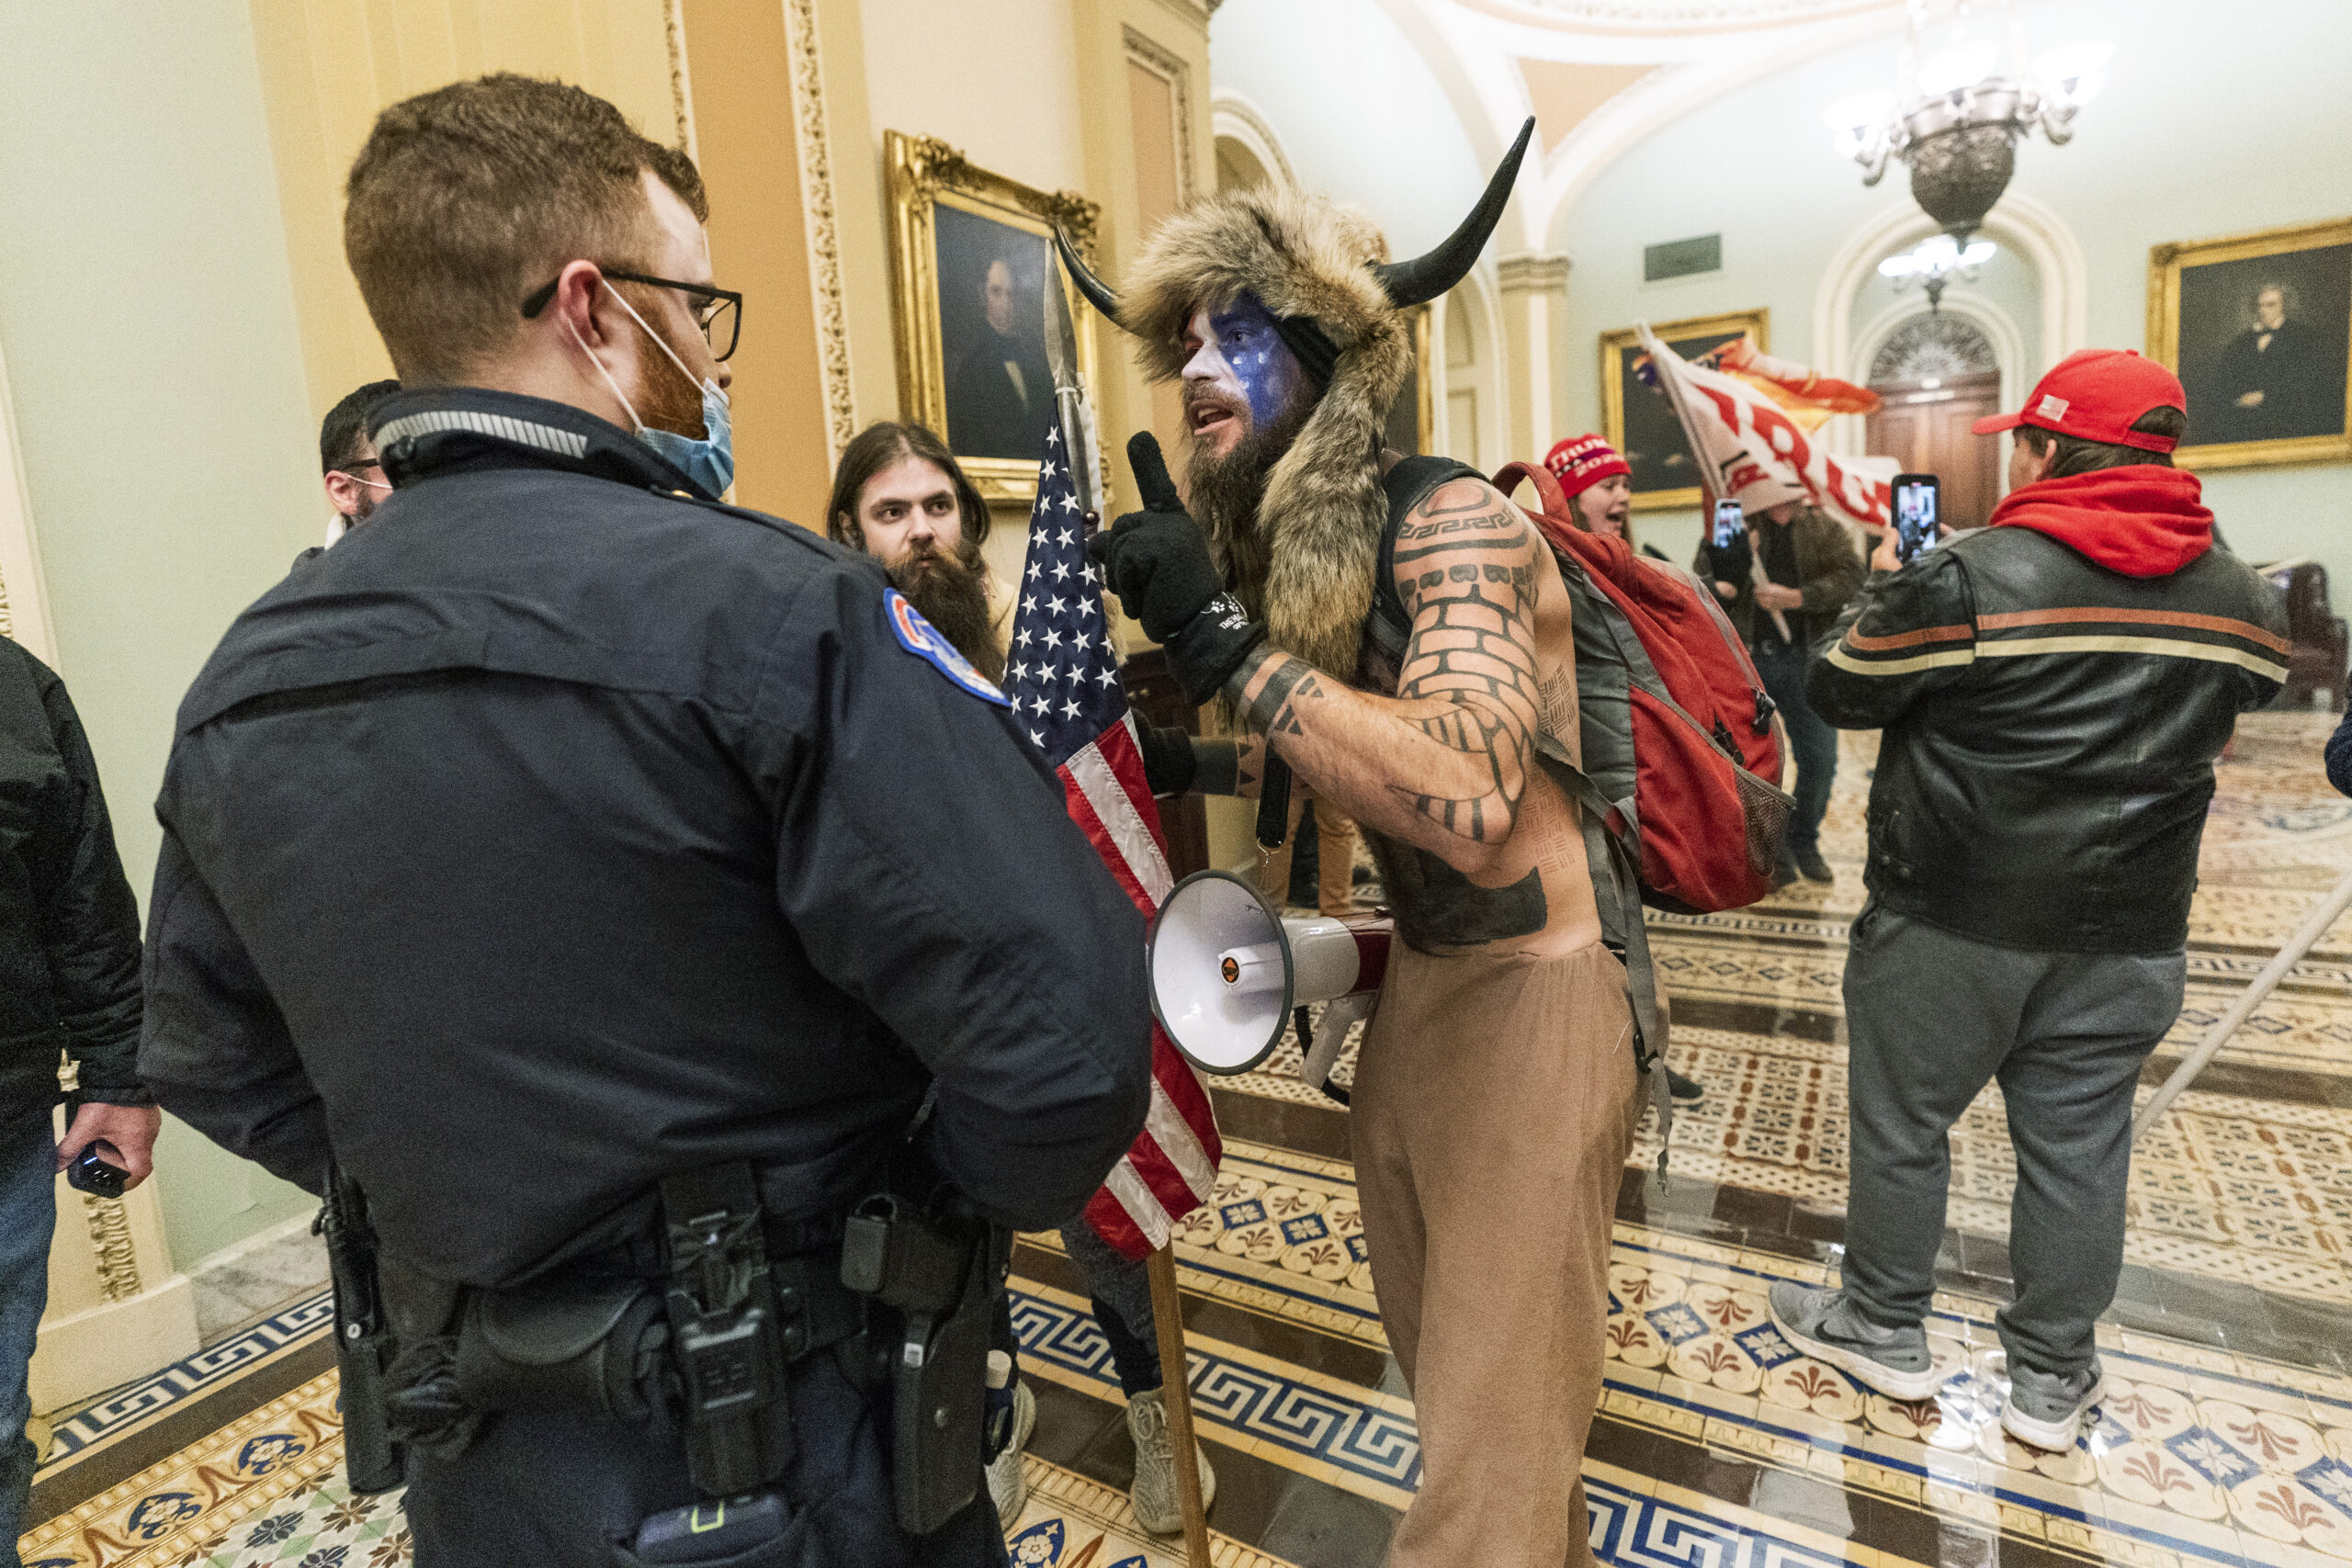 FILE - In this Jan. 6, 2021, file photo supporters of President Donald Trump are confronted by U.S. Capitol Police officers outside the Senate Chamber inside the Capitol in Washington. An Arizona man seen in photos and video of the mob wearing a fur hat with horns was also charged Saturday in Wednesday's chaos. Jacob Anthony Chansley, who also goes by the name Jake Angeli, was taken into custody Saturday, Jan. 9. (AP Photo/Manuel Balce Ceneta, File)